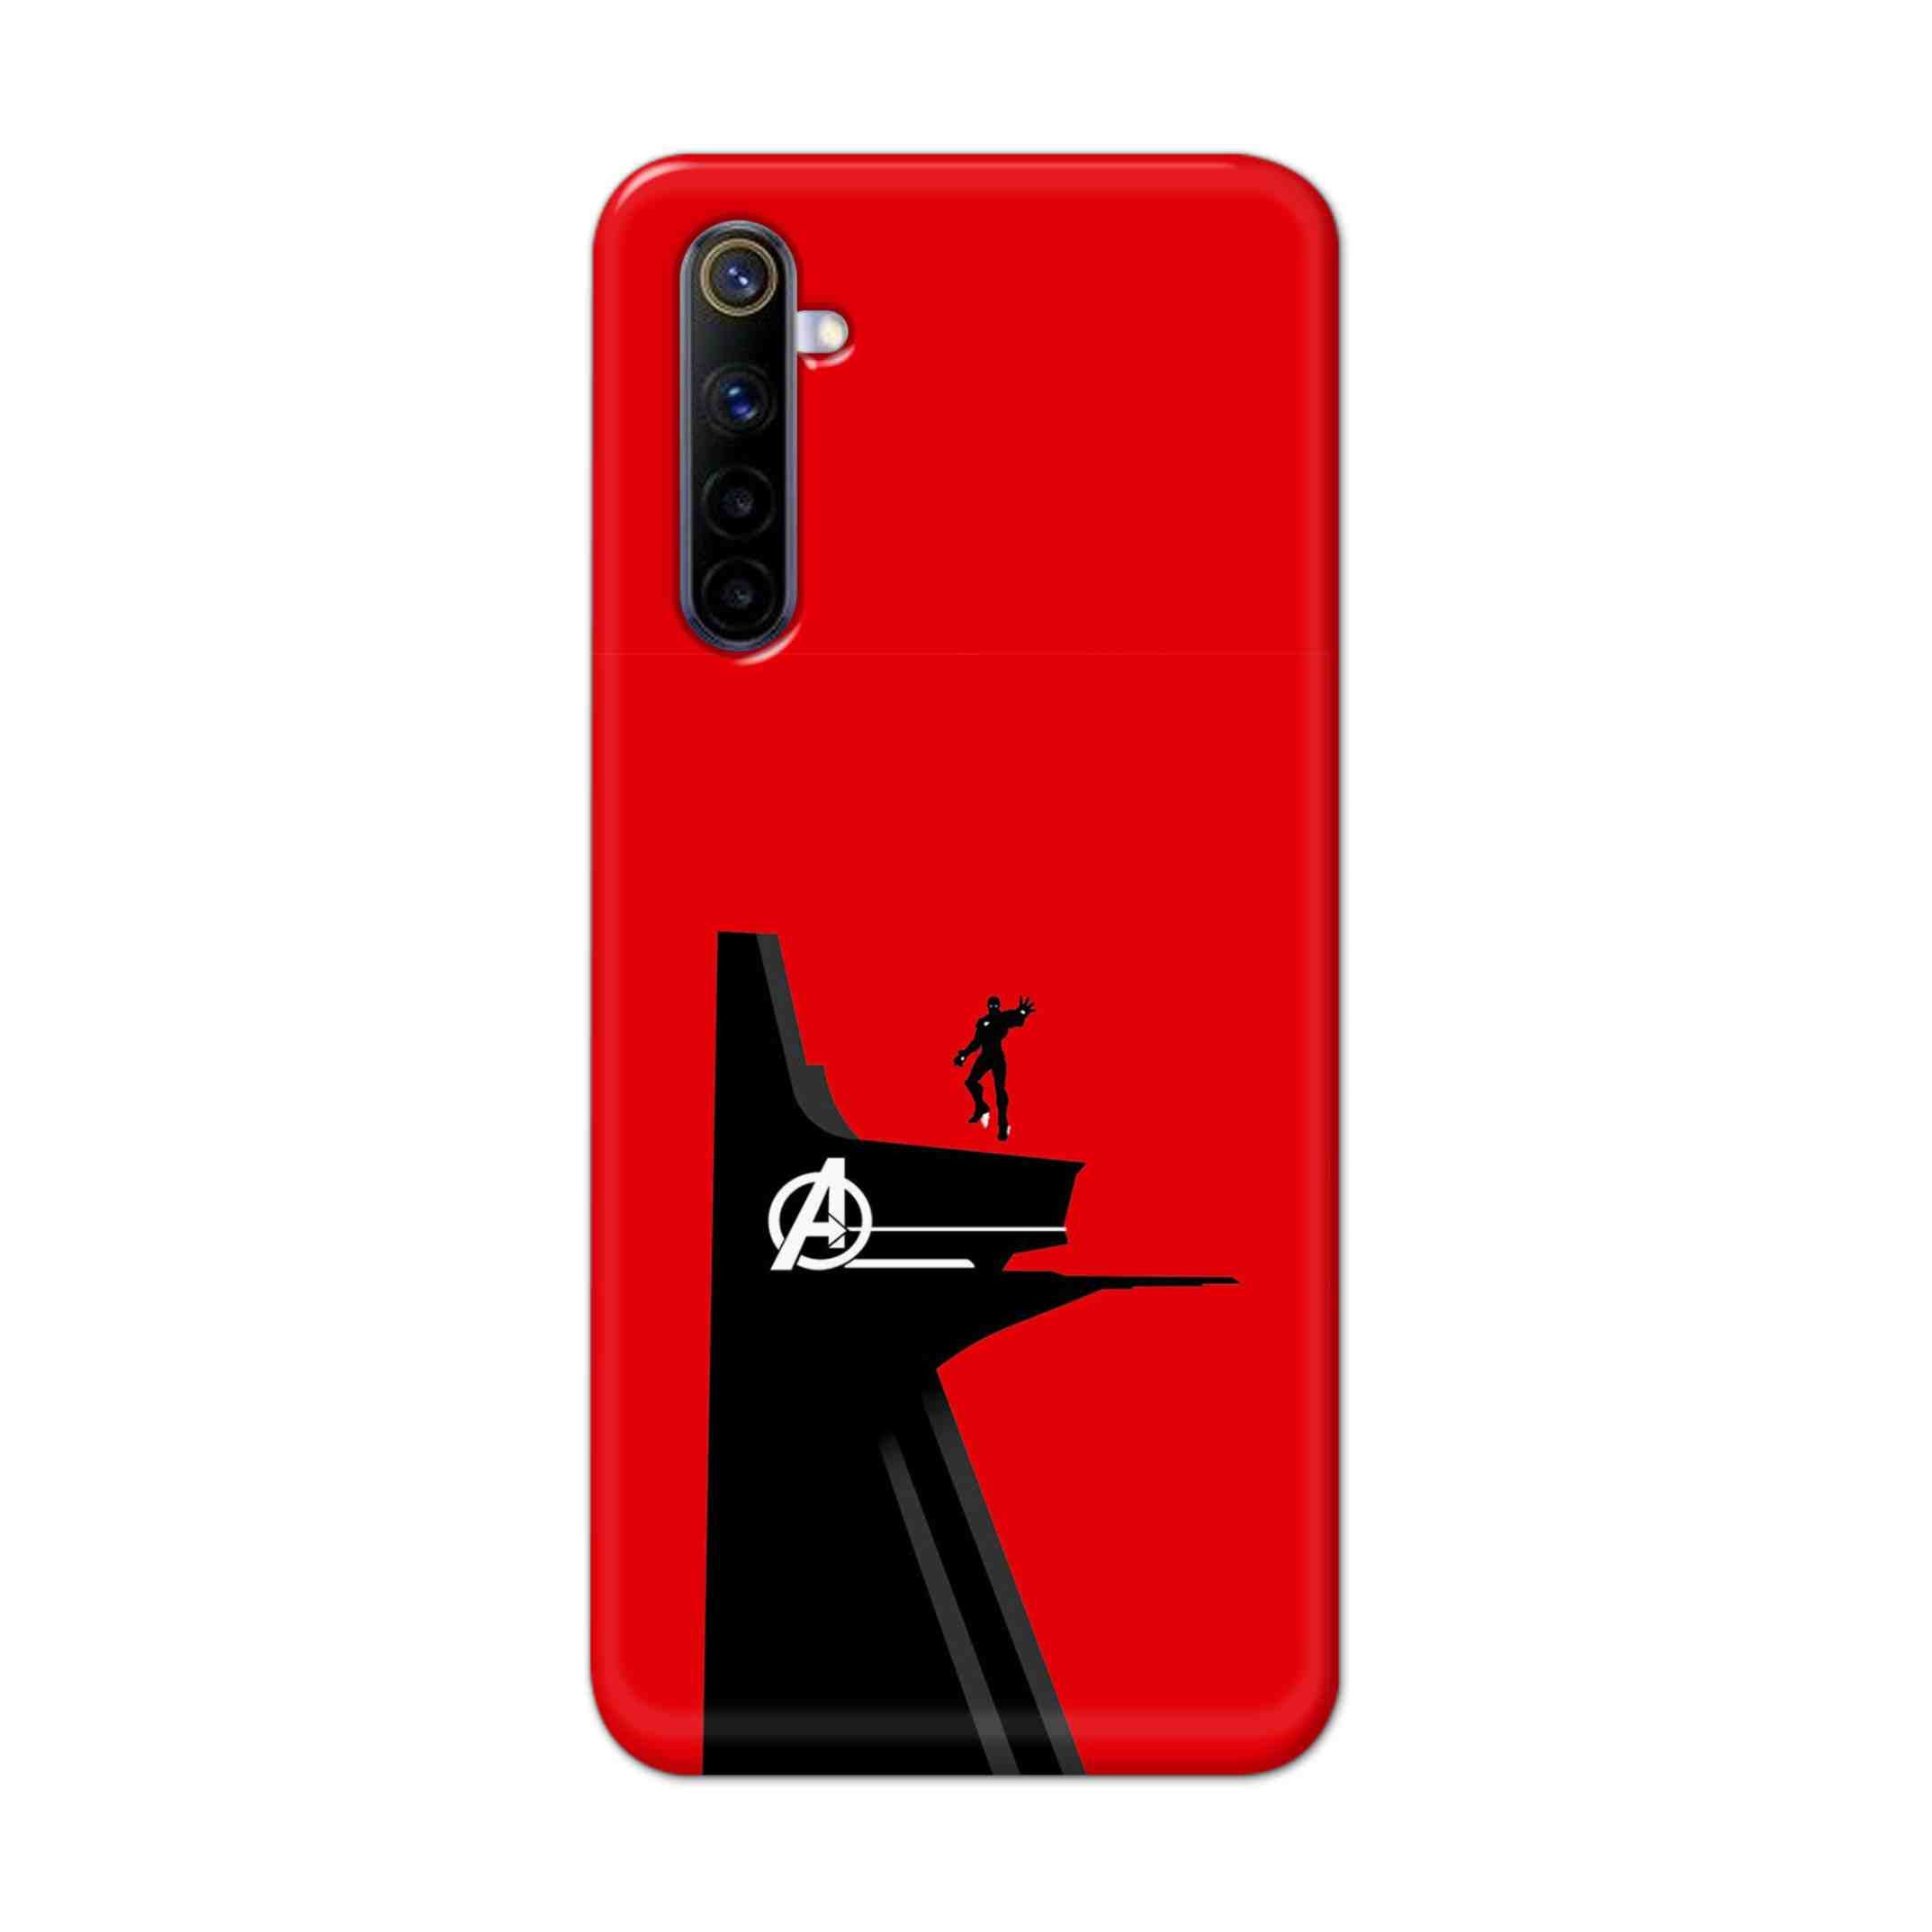 Buy Iron Man Hard Back Mobile Phone Case Cover For REALME 6 PRO Online